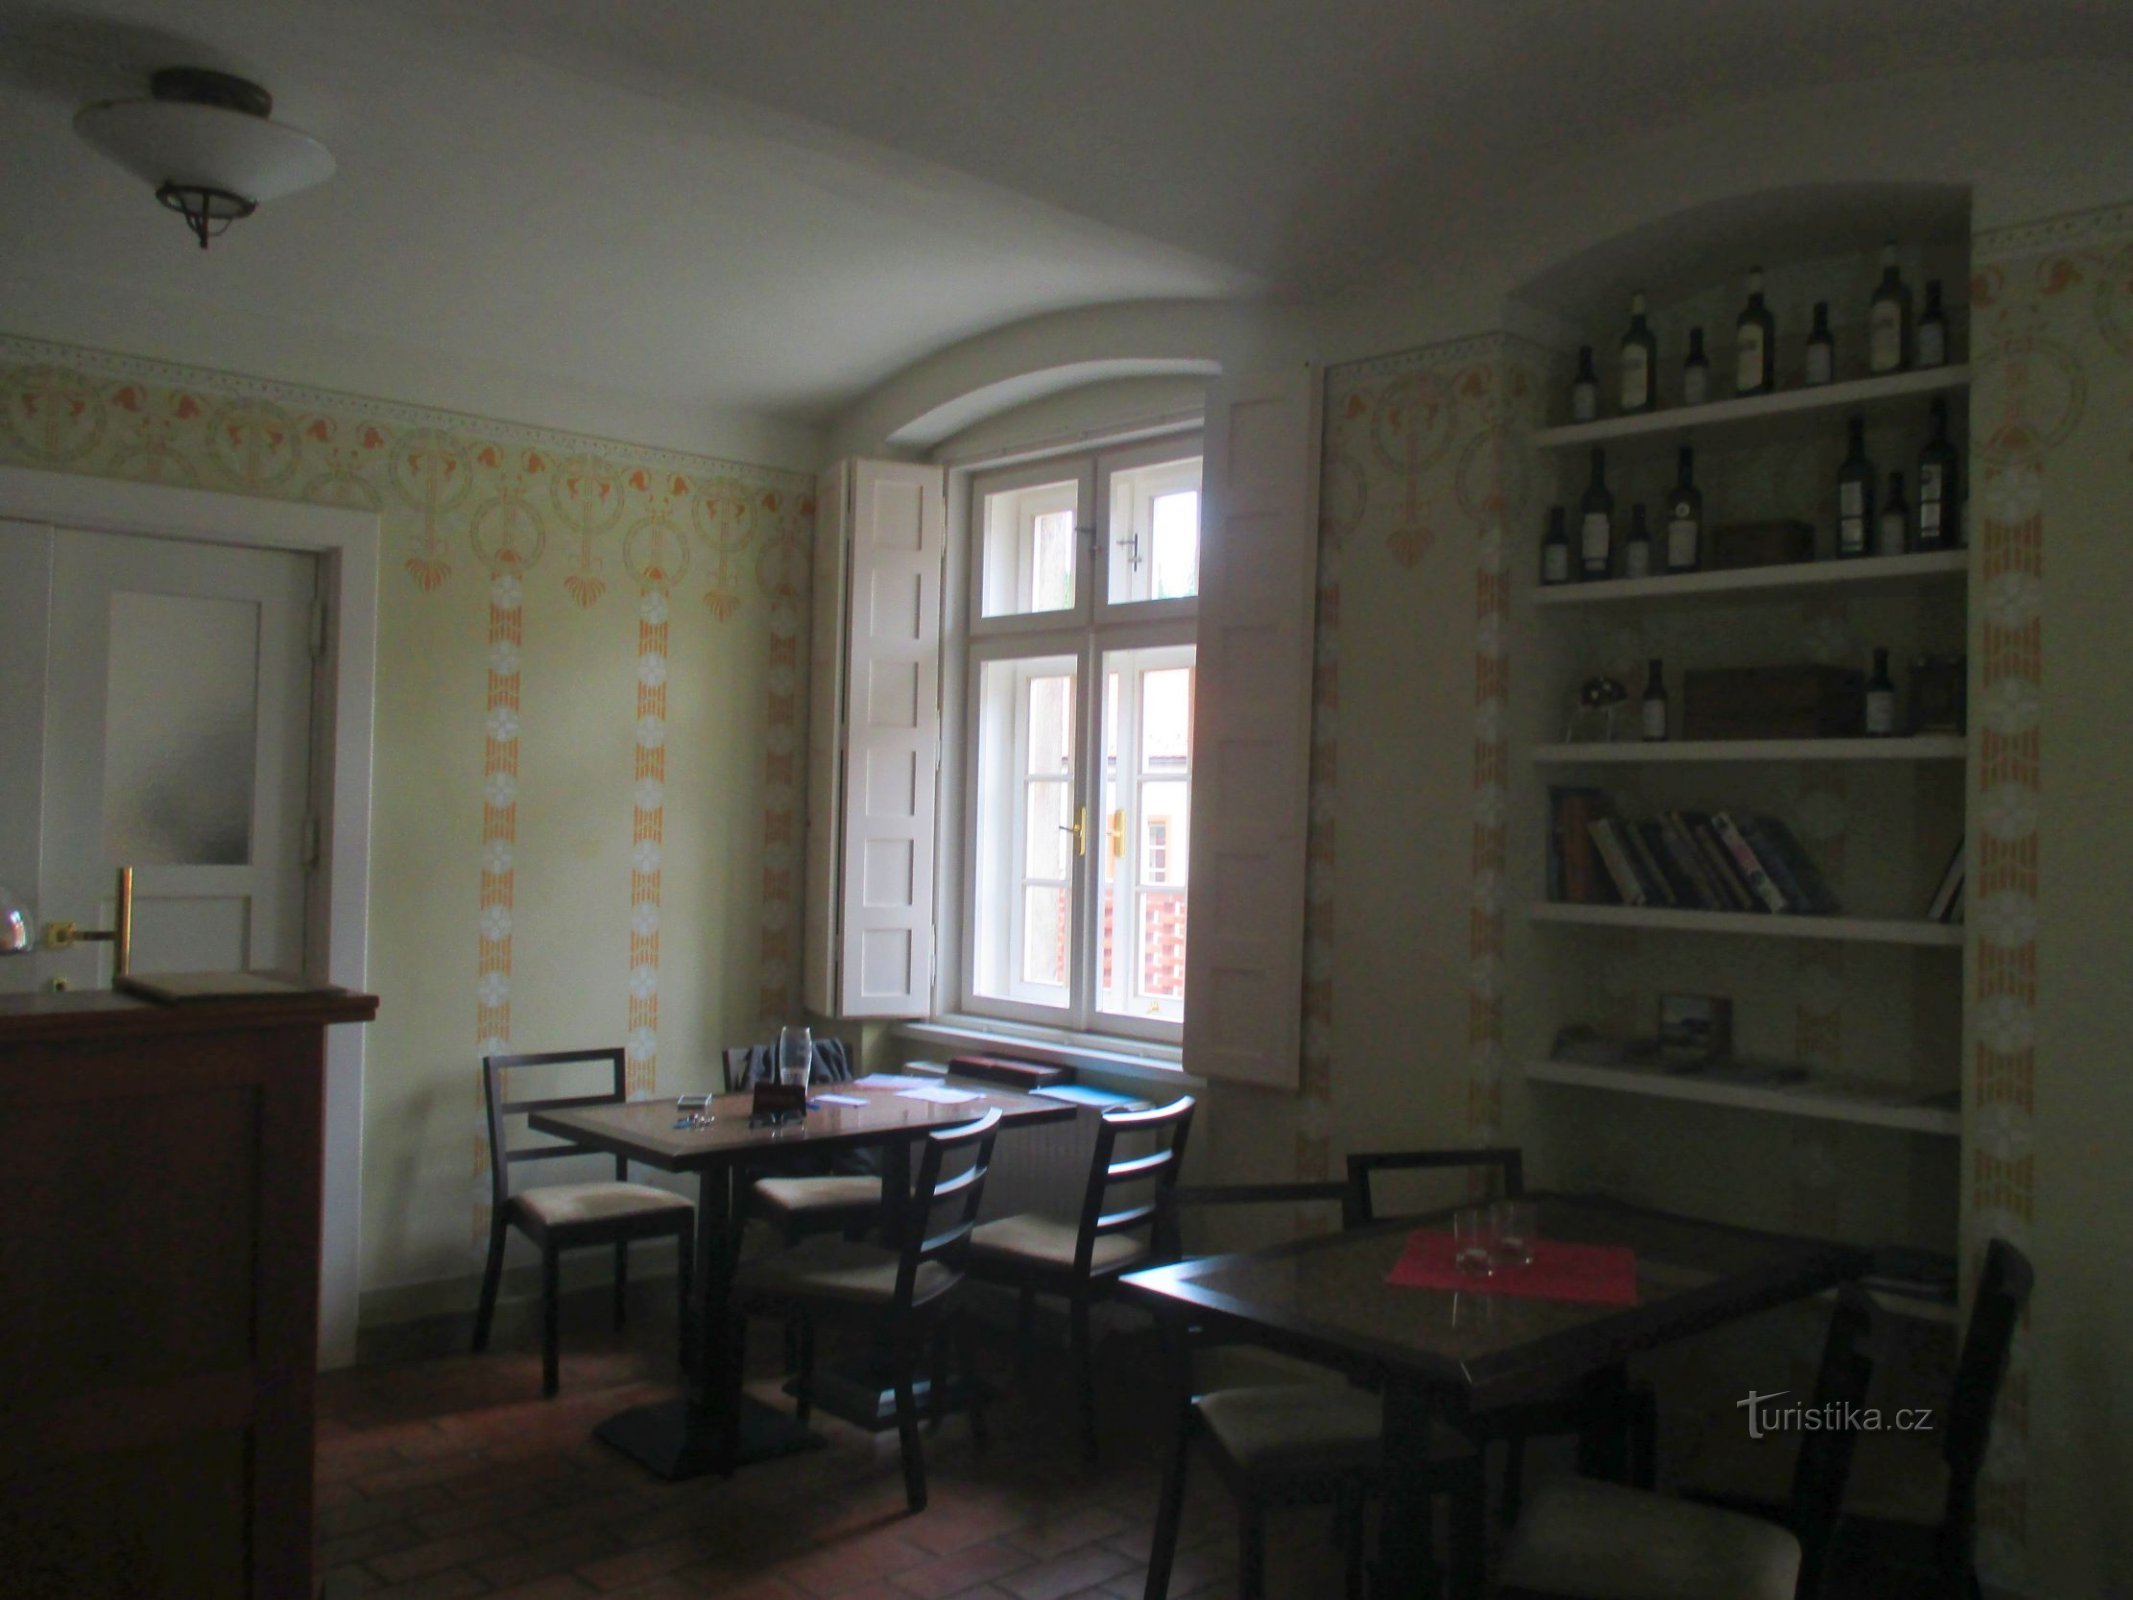 The Synagogue Café is located in a former rabbi's apartment with a faithfully restored interior.